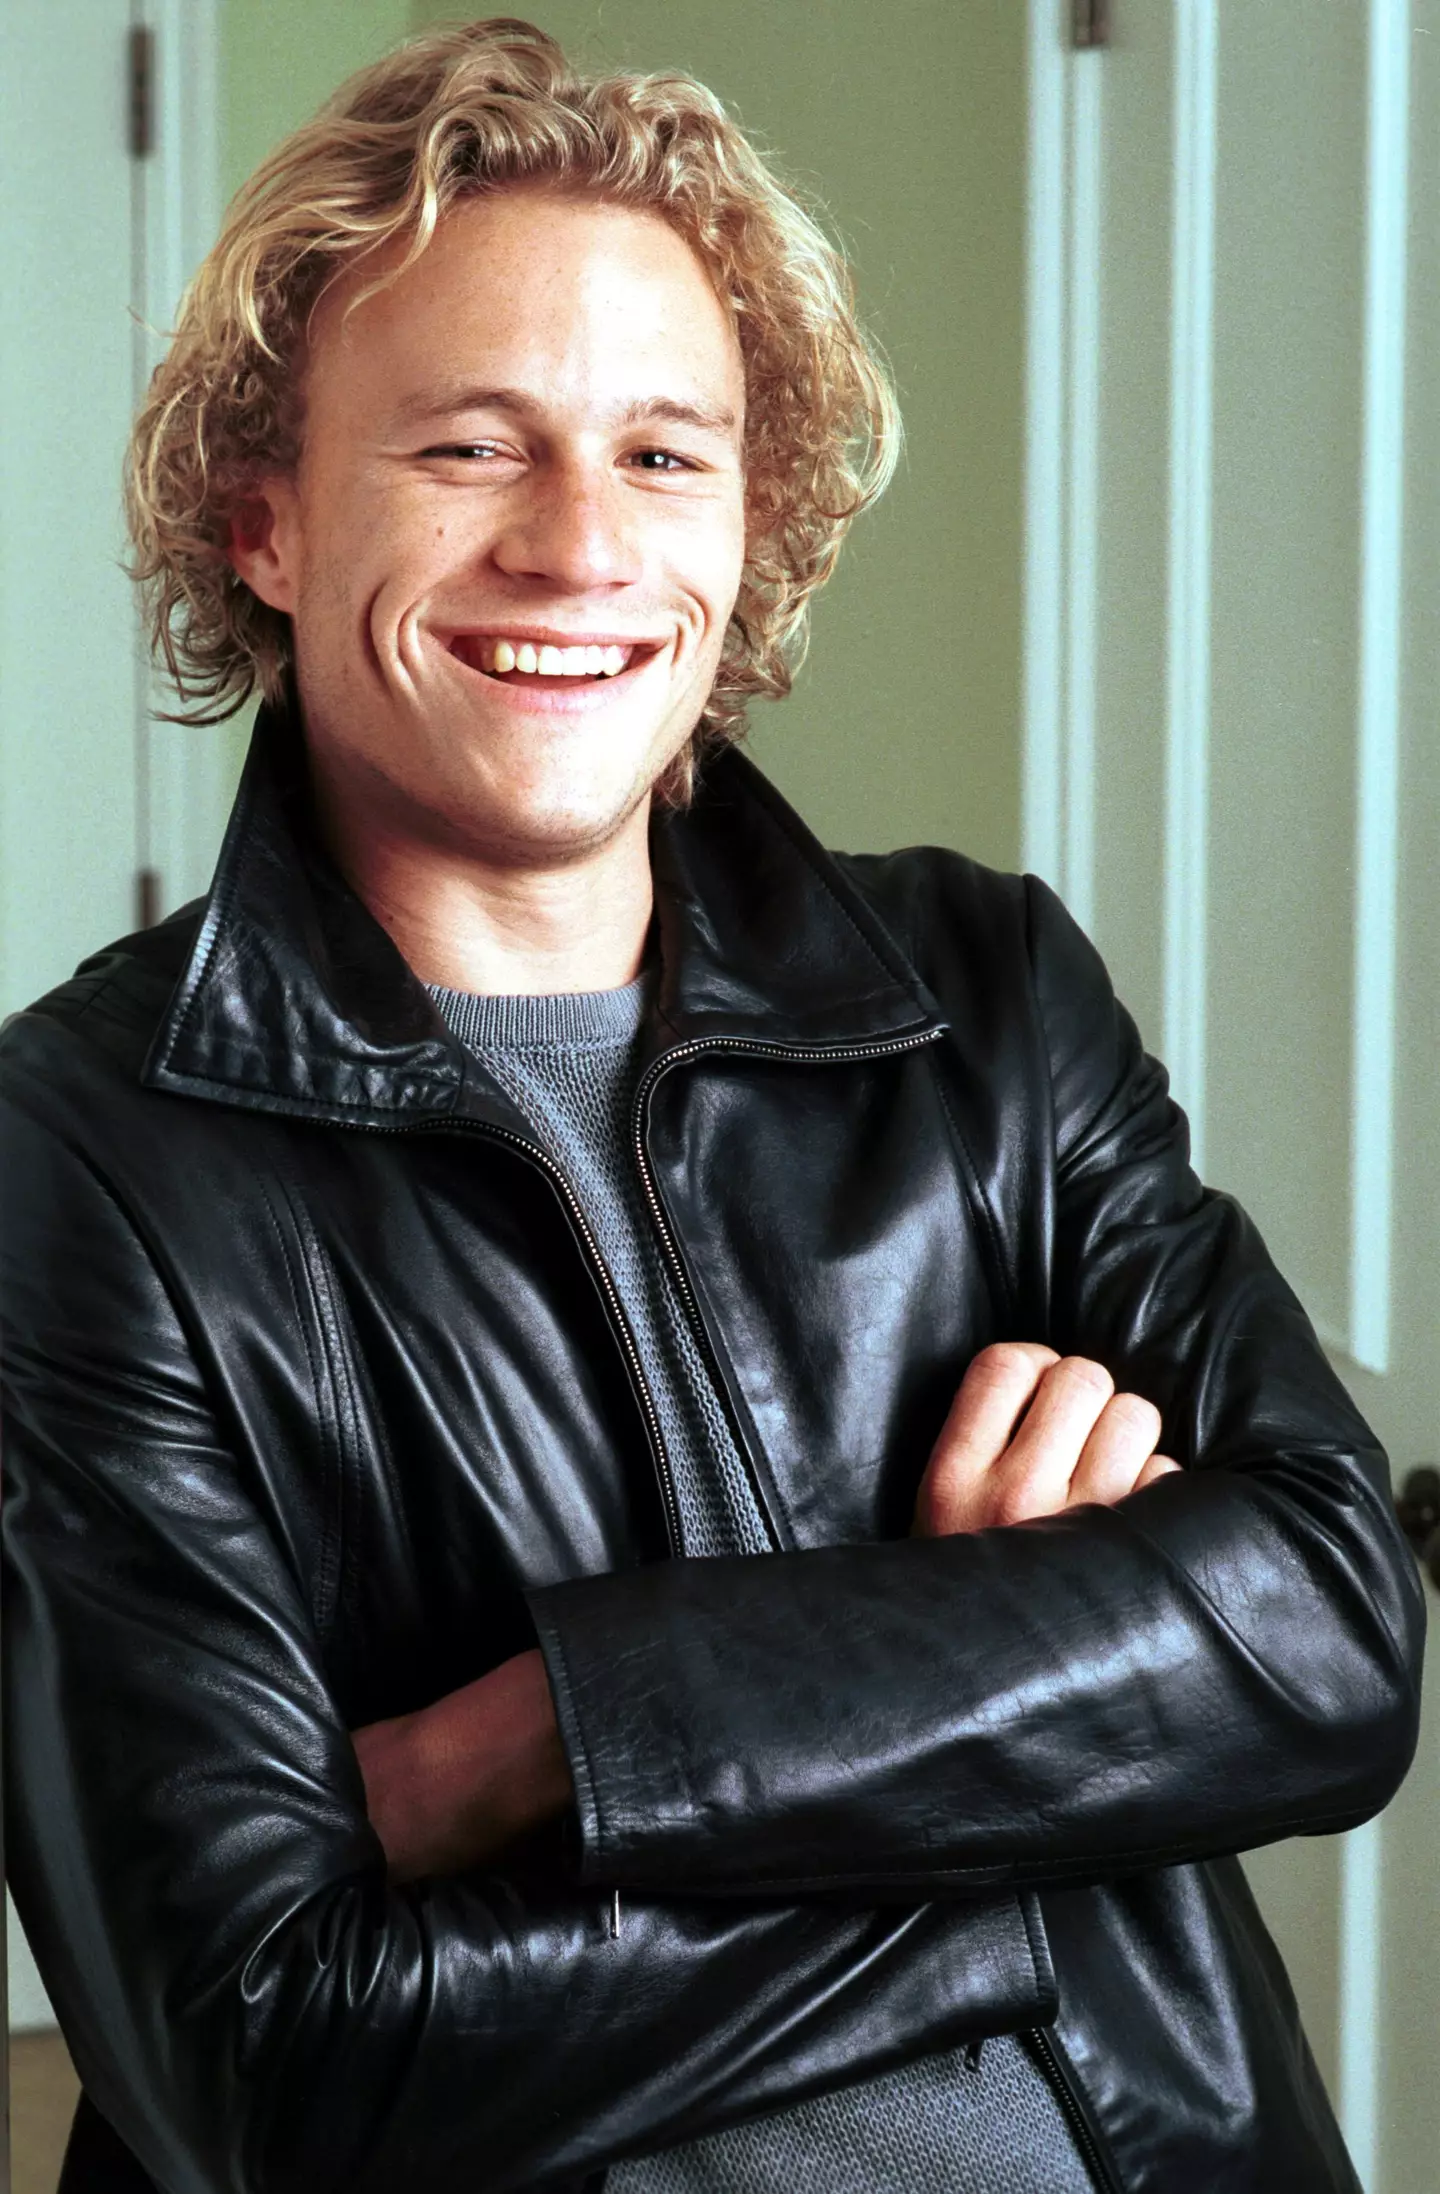 Heath Ledger pictured in 2000.